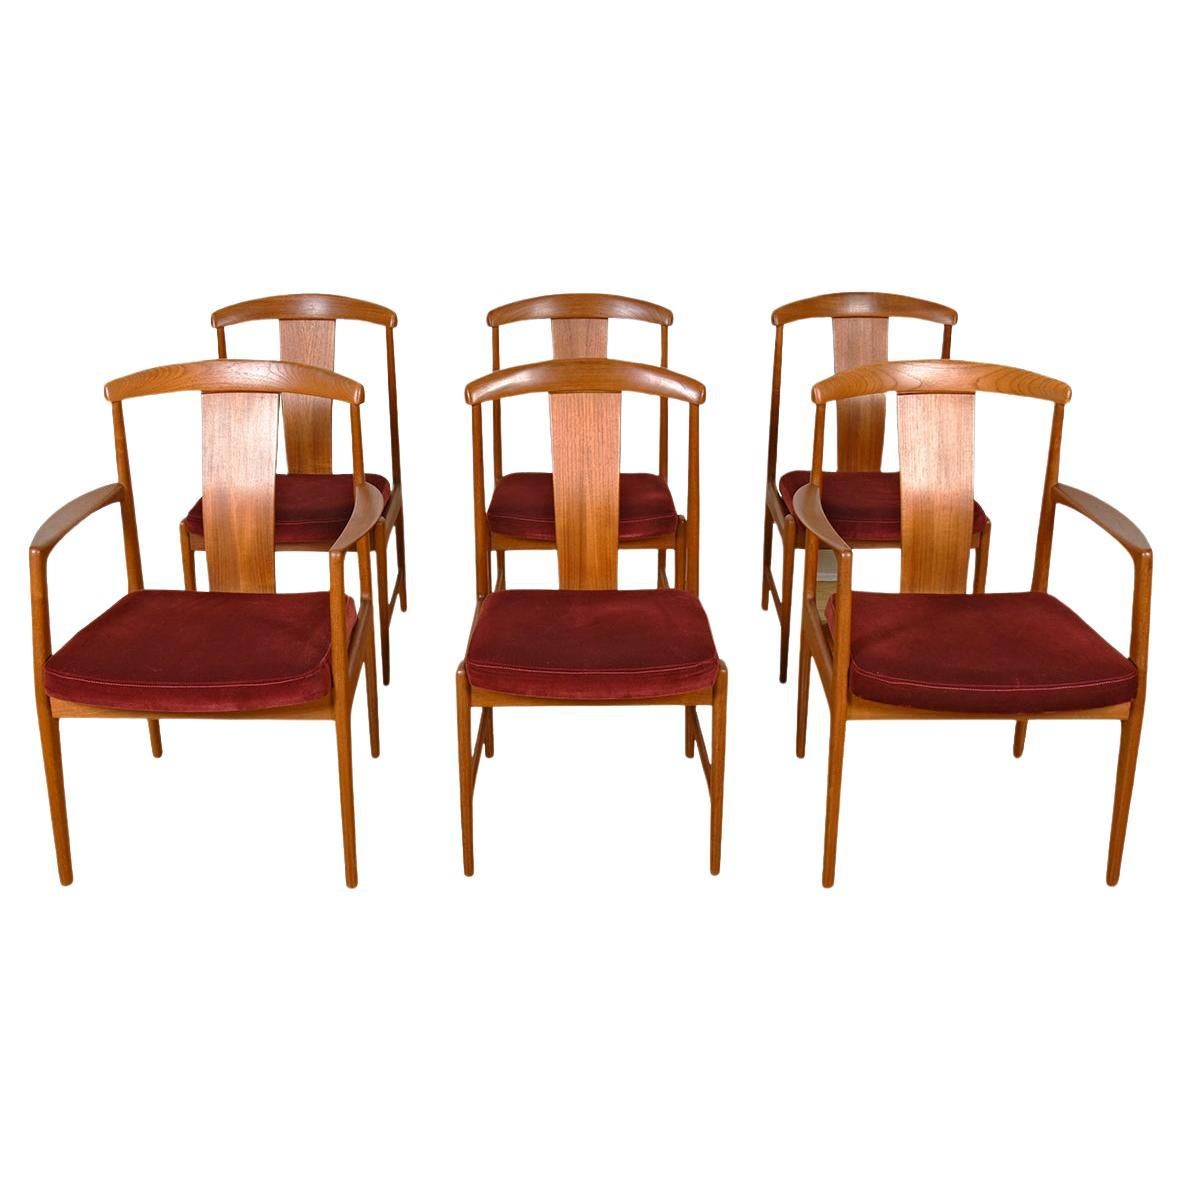 Set of 6 Swedish Modern Teak Dining Chairs by Folke Ohlsson for DUX For Sale